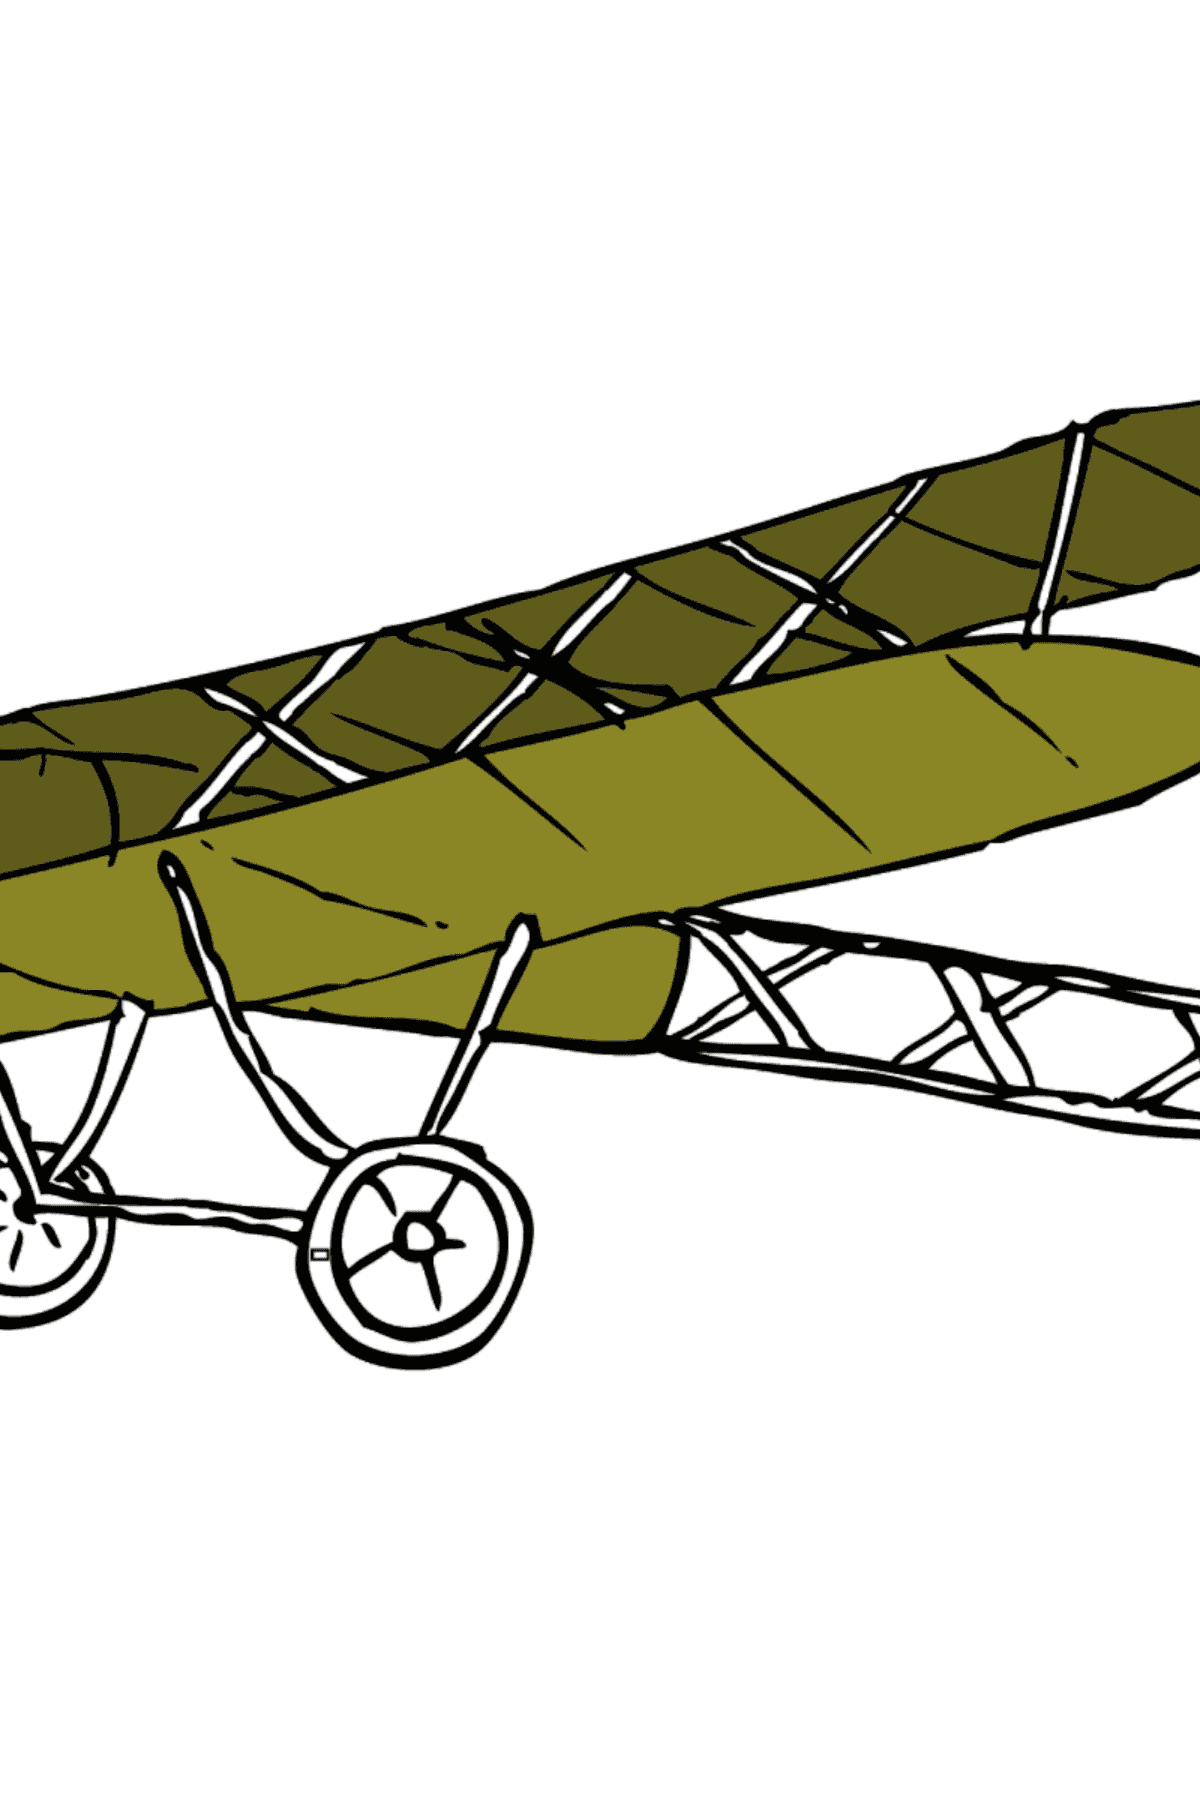 Military Biplane Coloring Page - Coloring by Geometric Shapes for Kids